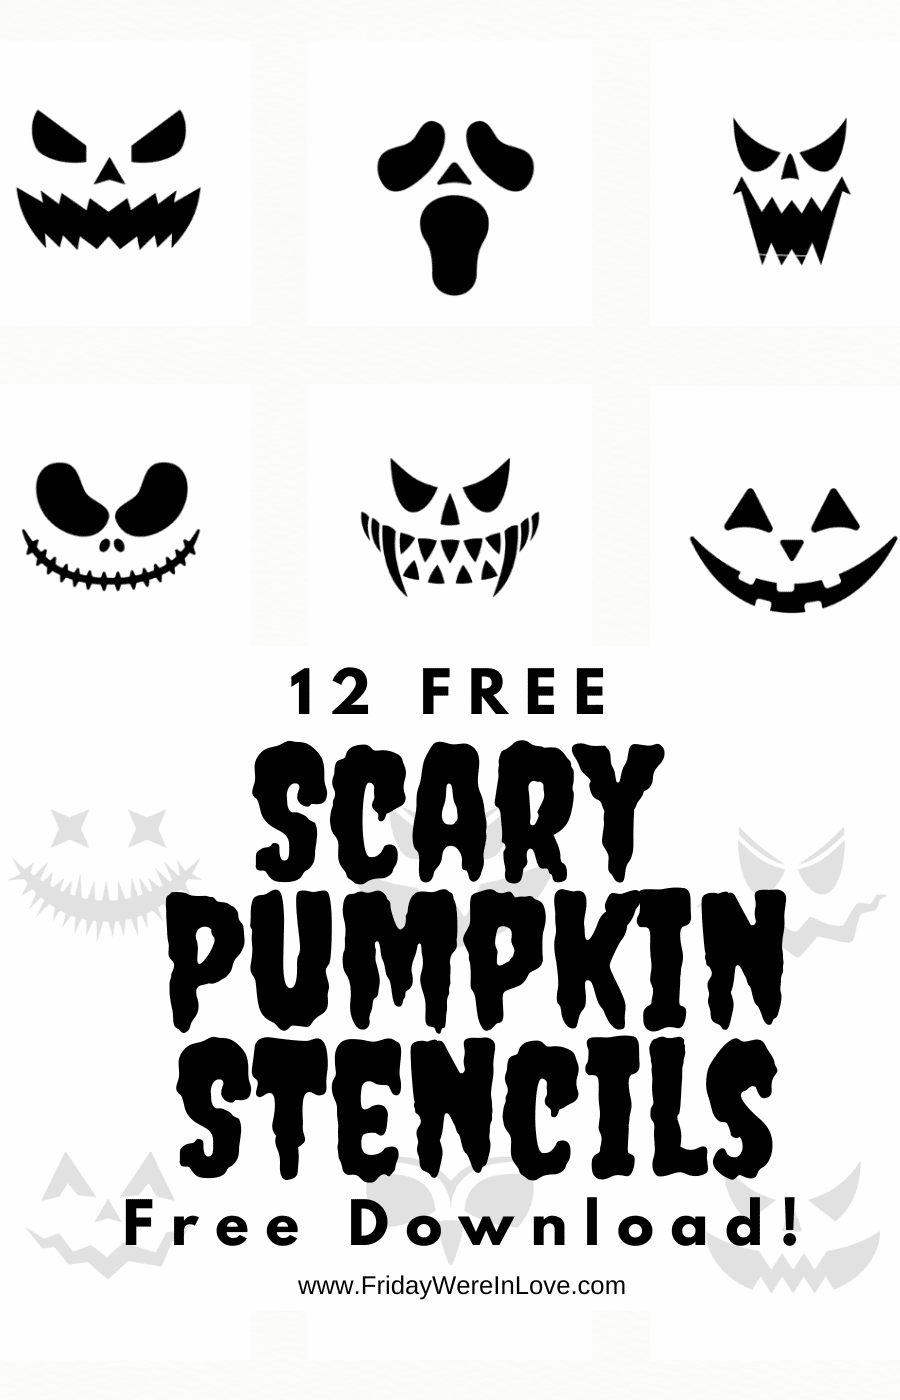 Scary Pumpkin Stencils: Free Printable! - Friday We're In Love